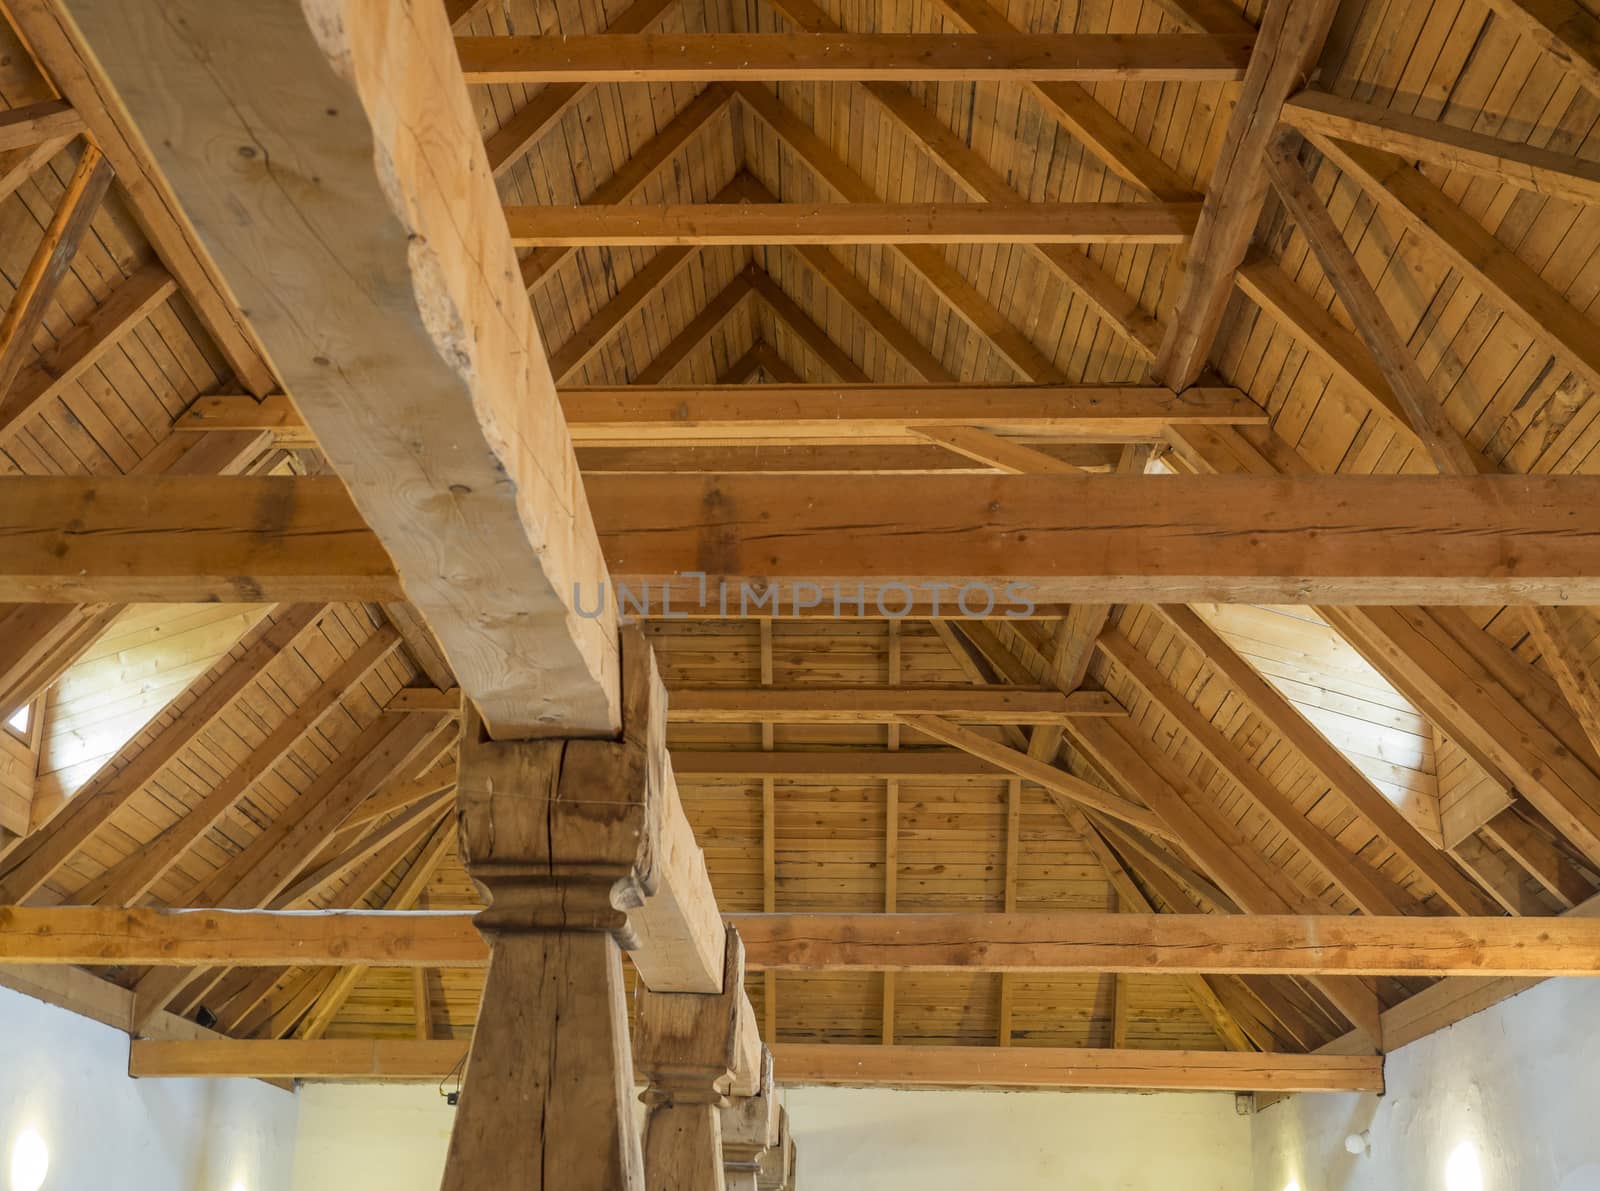 massive timber structure timberwork of roof on old baroque farm house made from natural oak wood